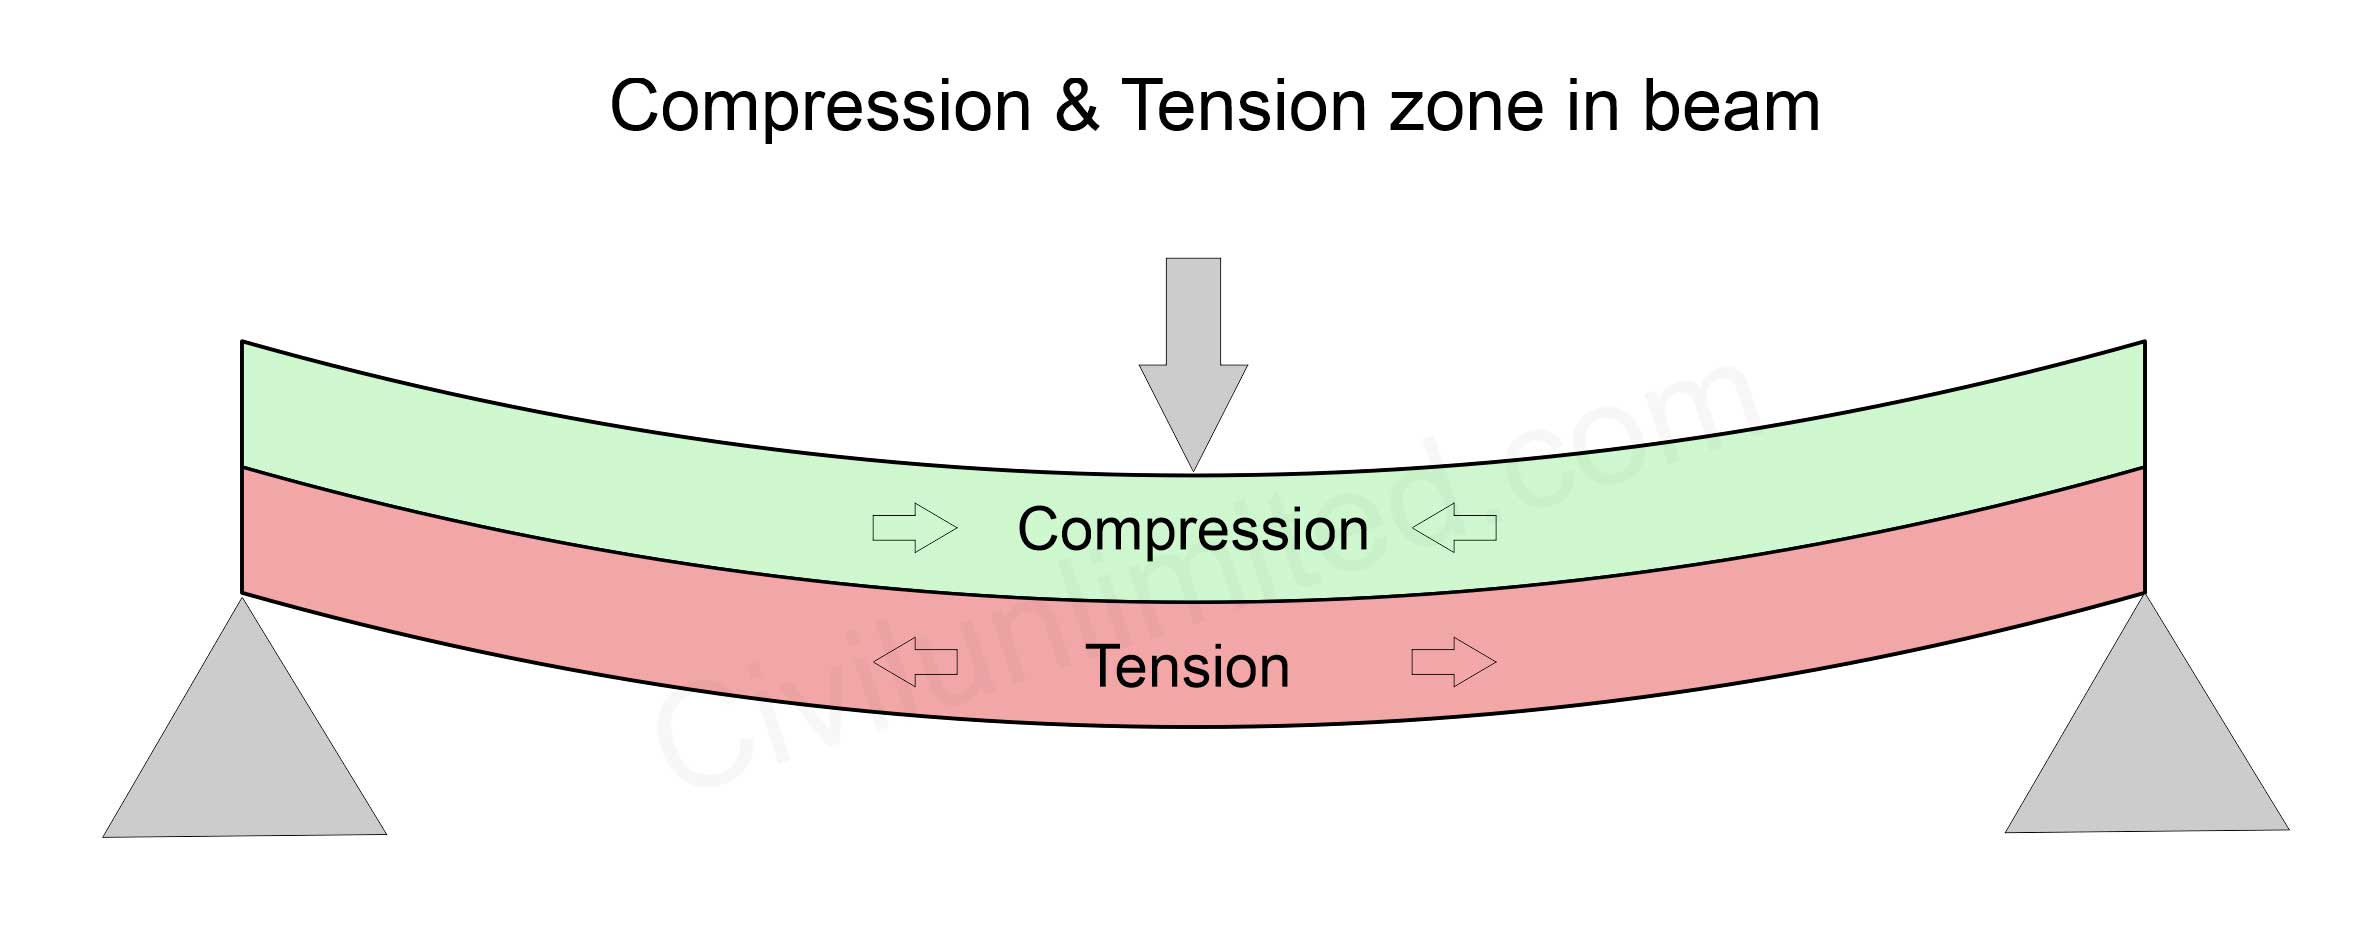 Compression and tension zone in singly reinforced beam and doubly reinforced beam